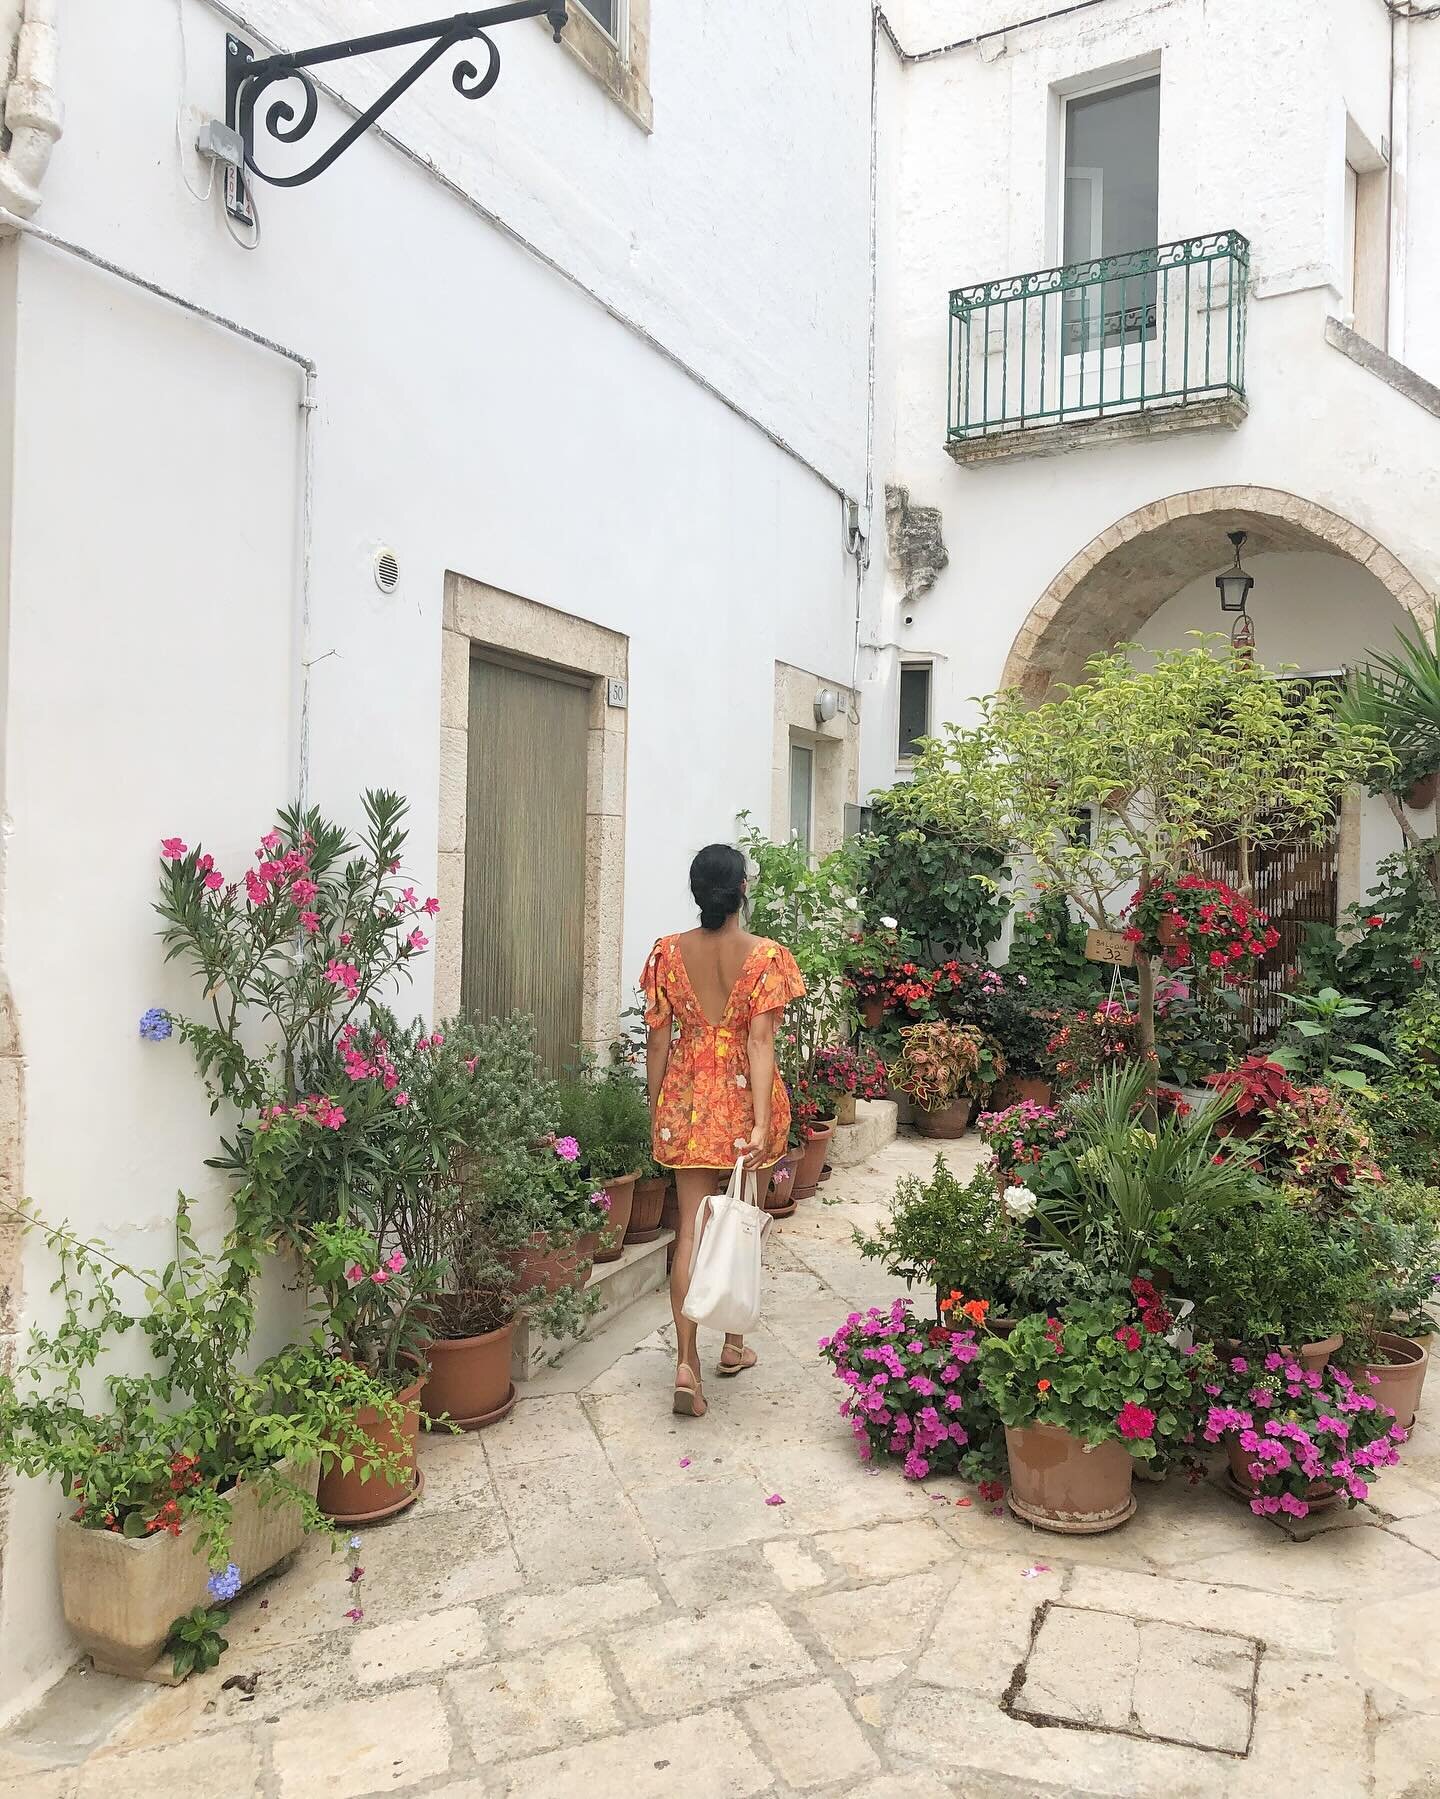 🇮🇹 LOCORONTONDO 🇮🇹

🍃 an Italian summer is something I always adore ✨ a country I return too more often than most ✨ always exploring various regions 

❤️ this was a summer spent traipsing all over Puglia

👘 wearing one of my first ever kimono c